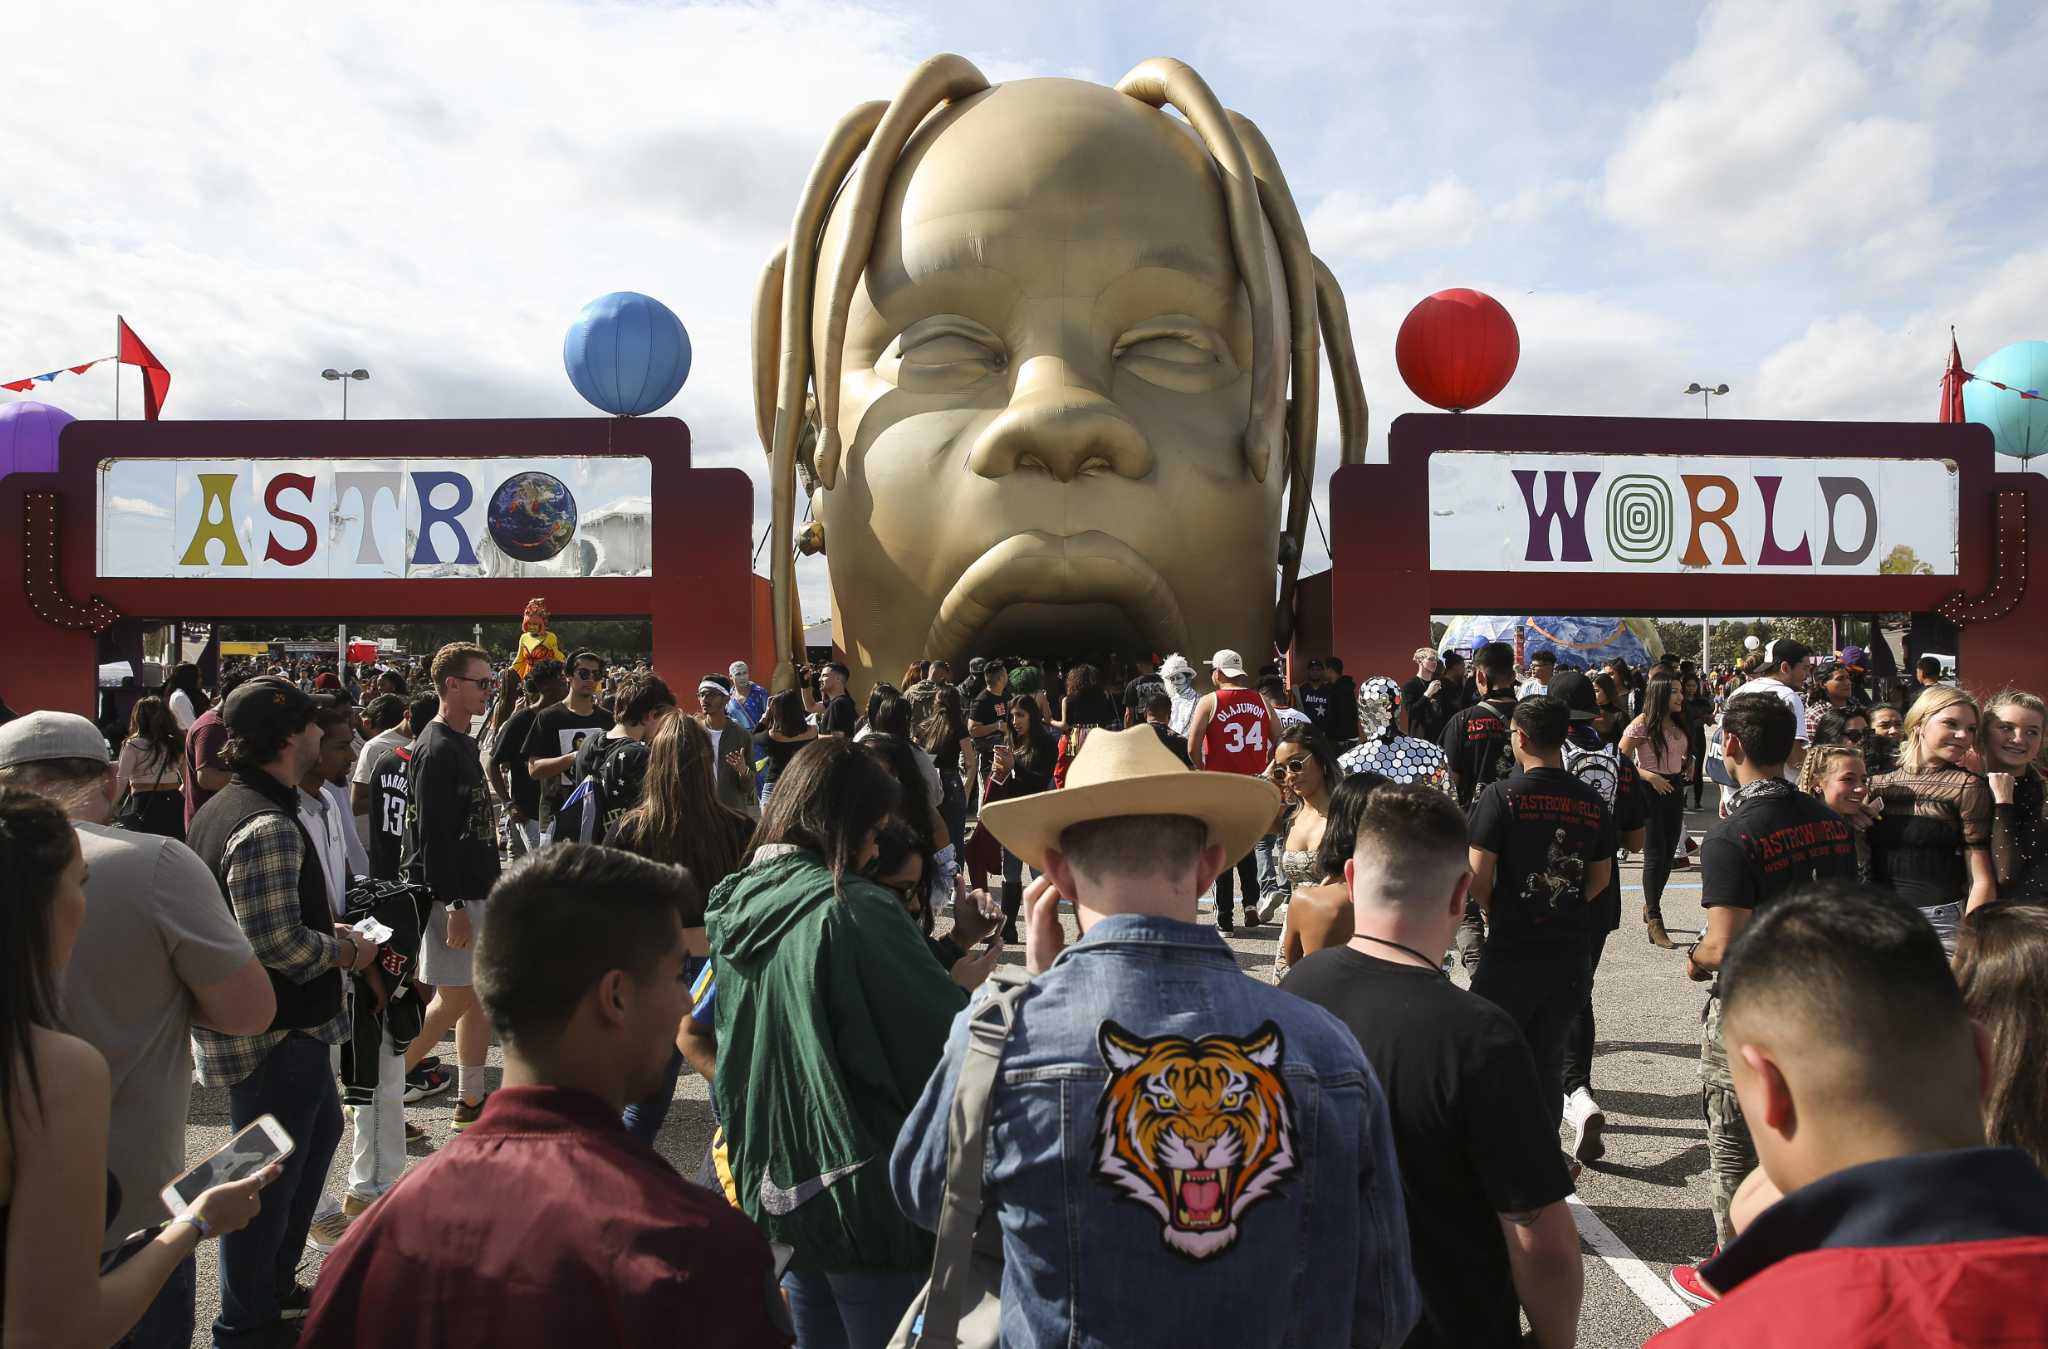 Travis Scott's 'Astroworld' Music Fest to Return This Fall With